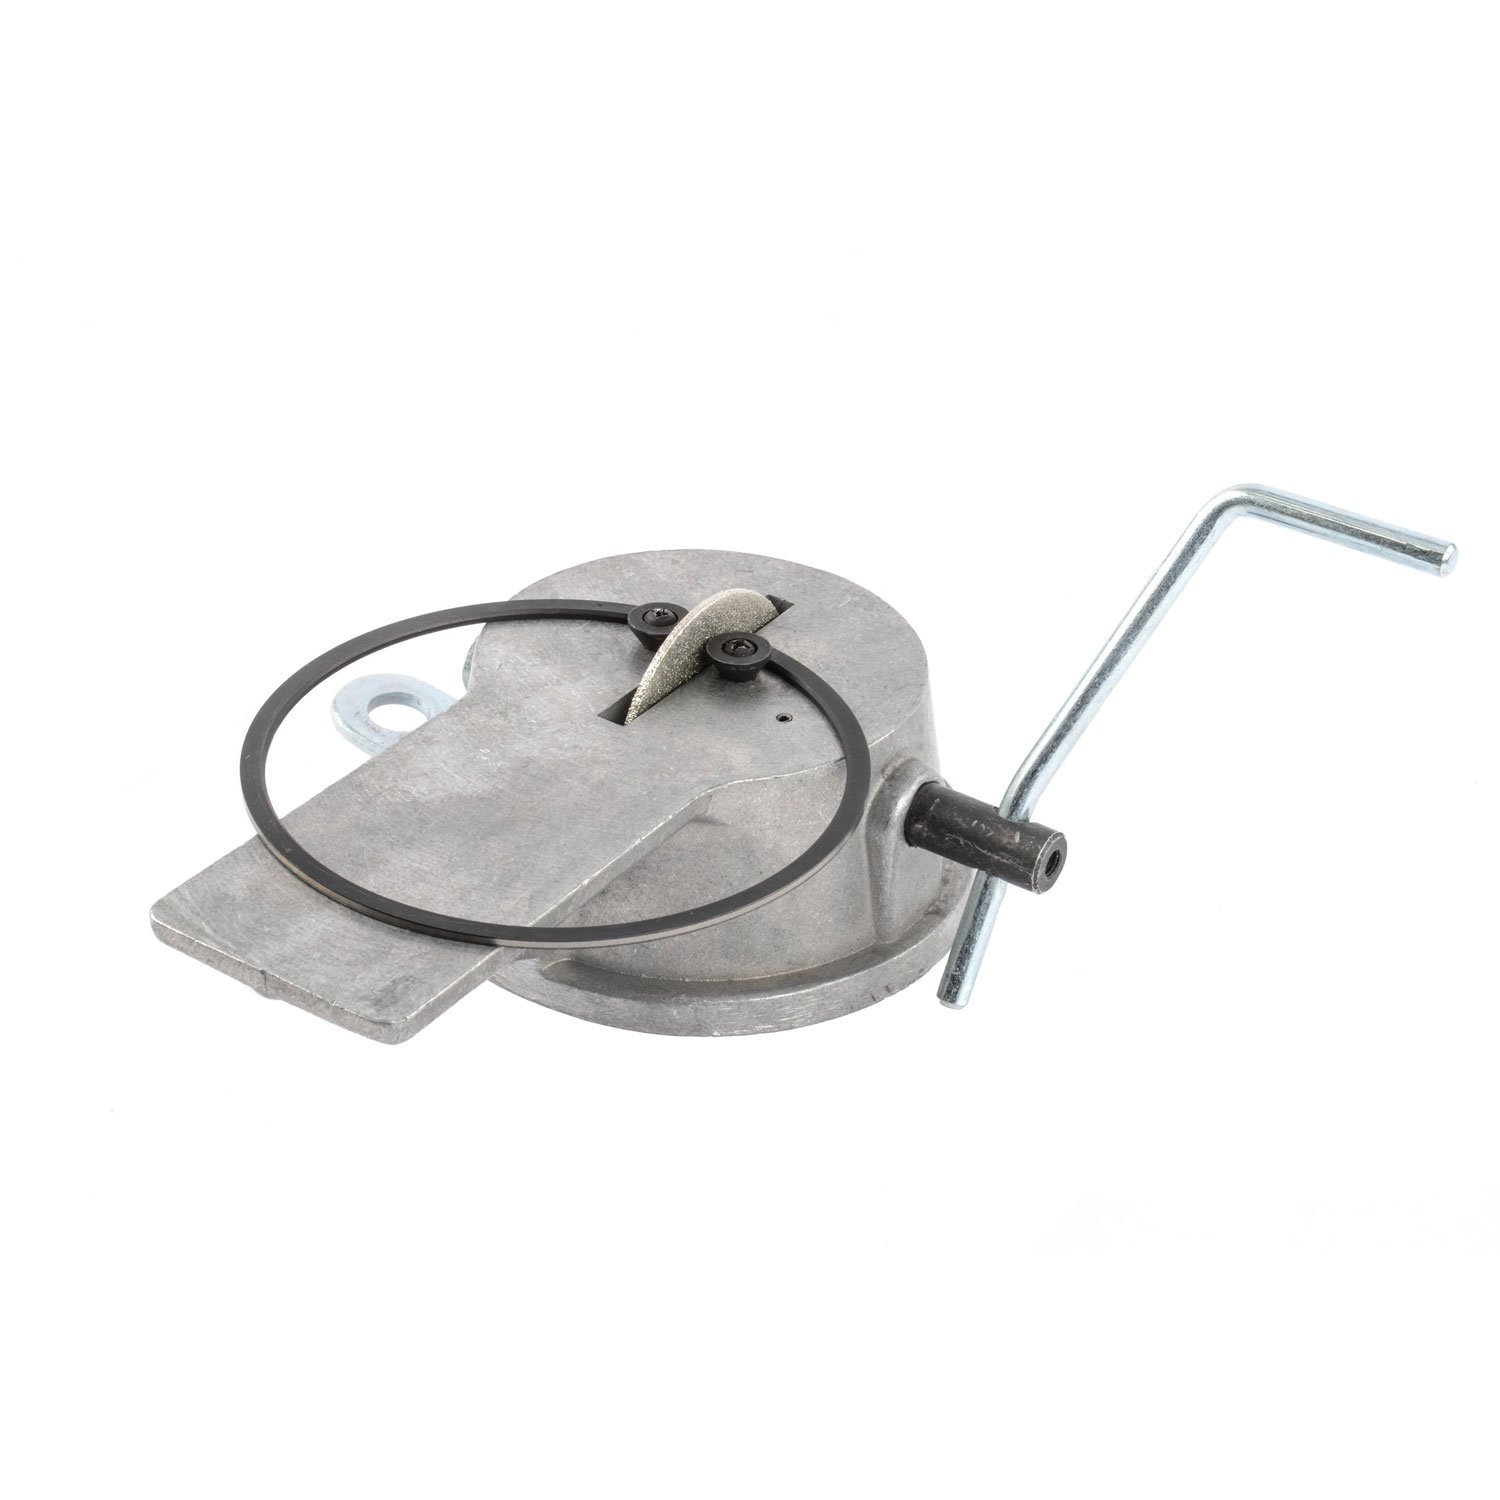 Piston Ring Filer Tool 170/140 Grit | Purchase a Piston Ring Grinder Online  - JEGS